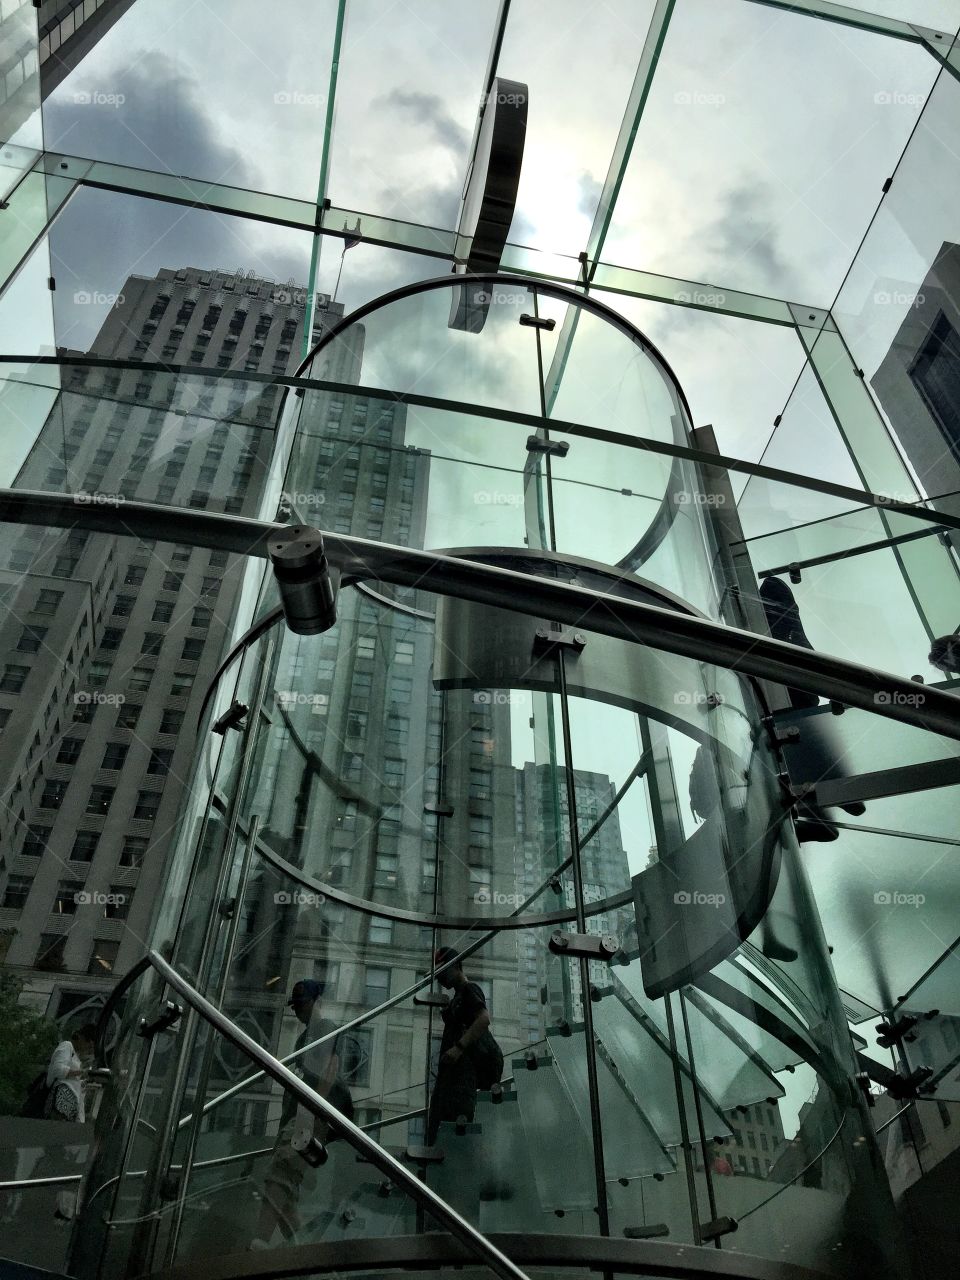 Apple in the big apple. View looking up through the entrance the the Apple Store in Manhattan. 